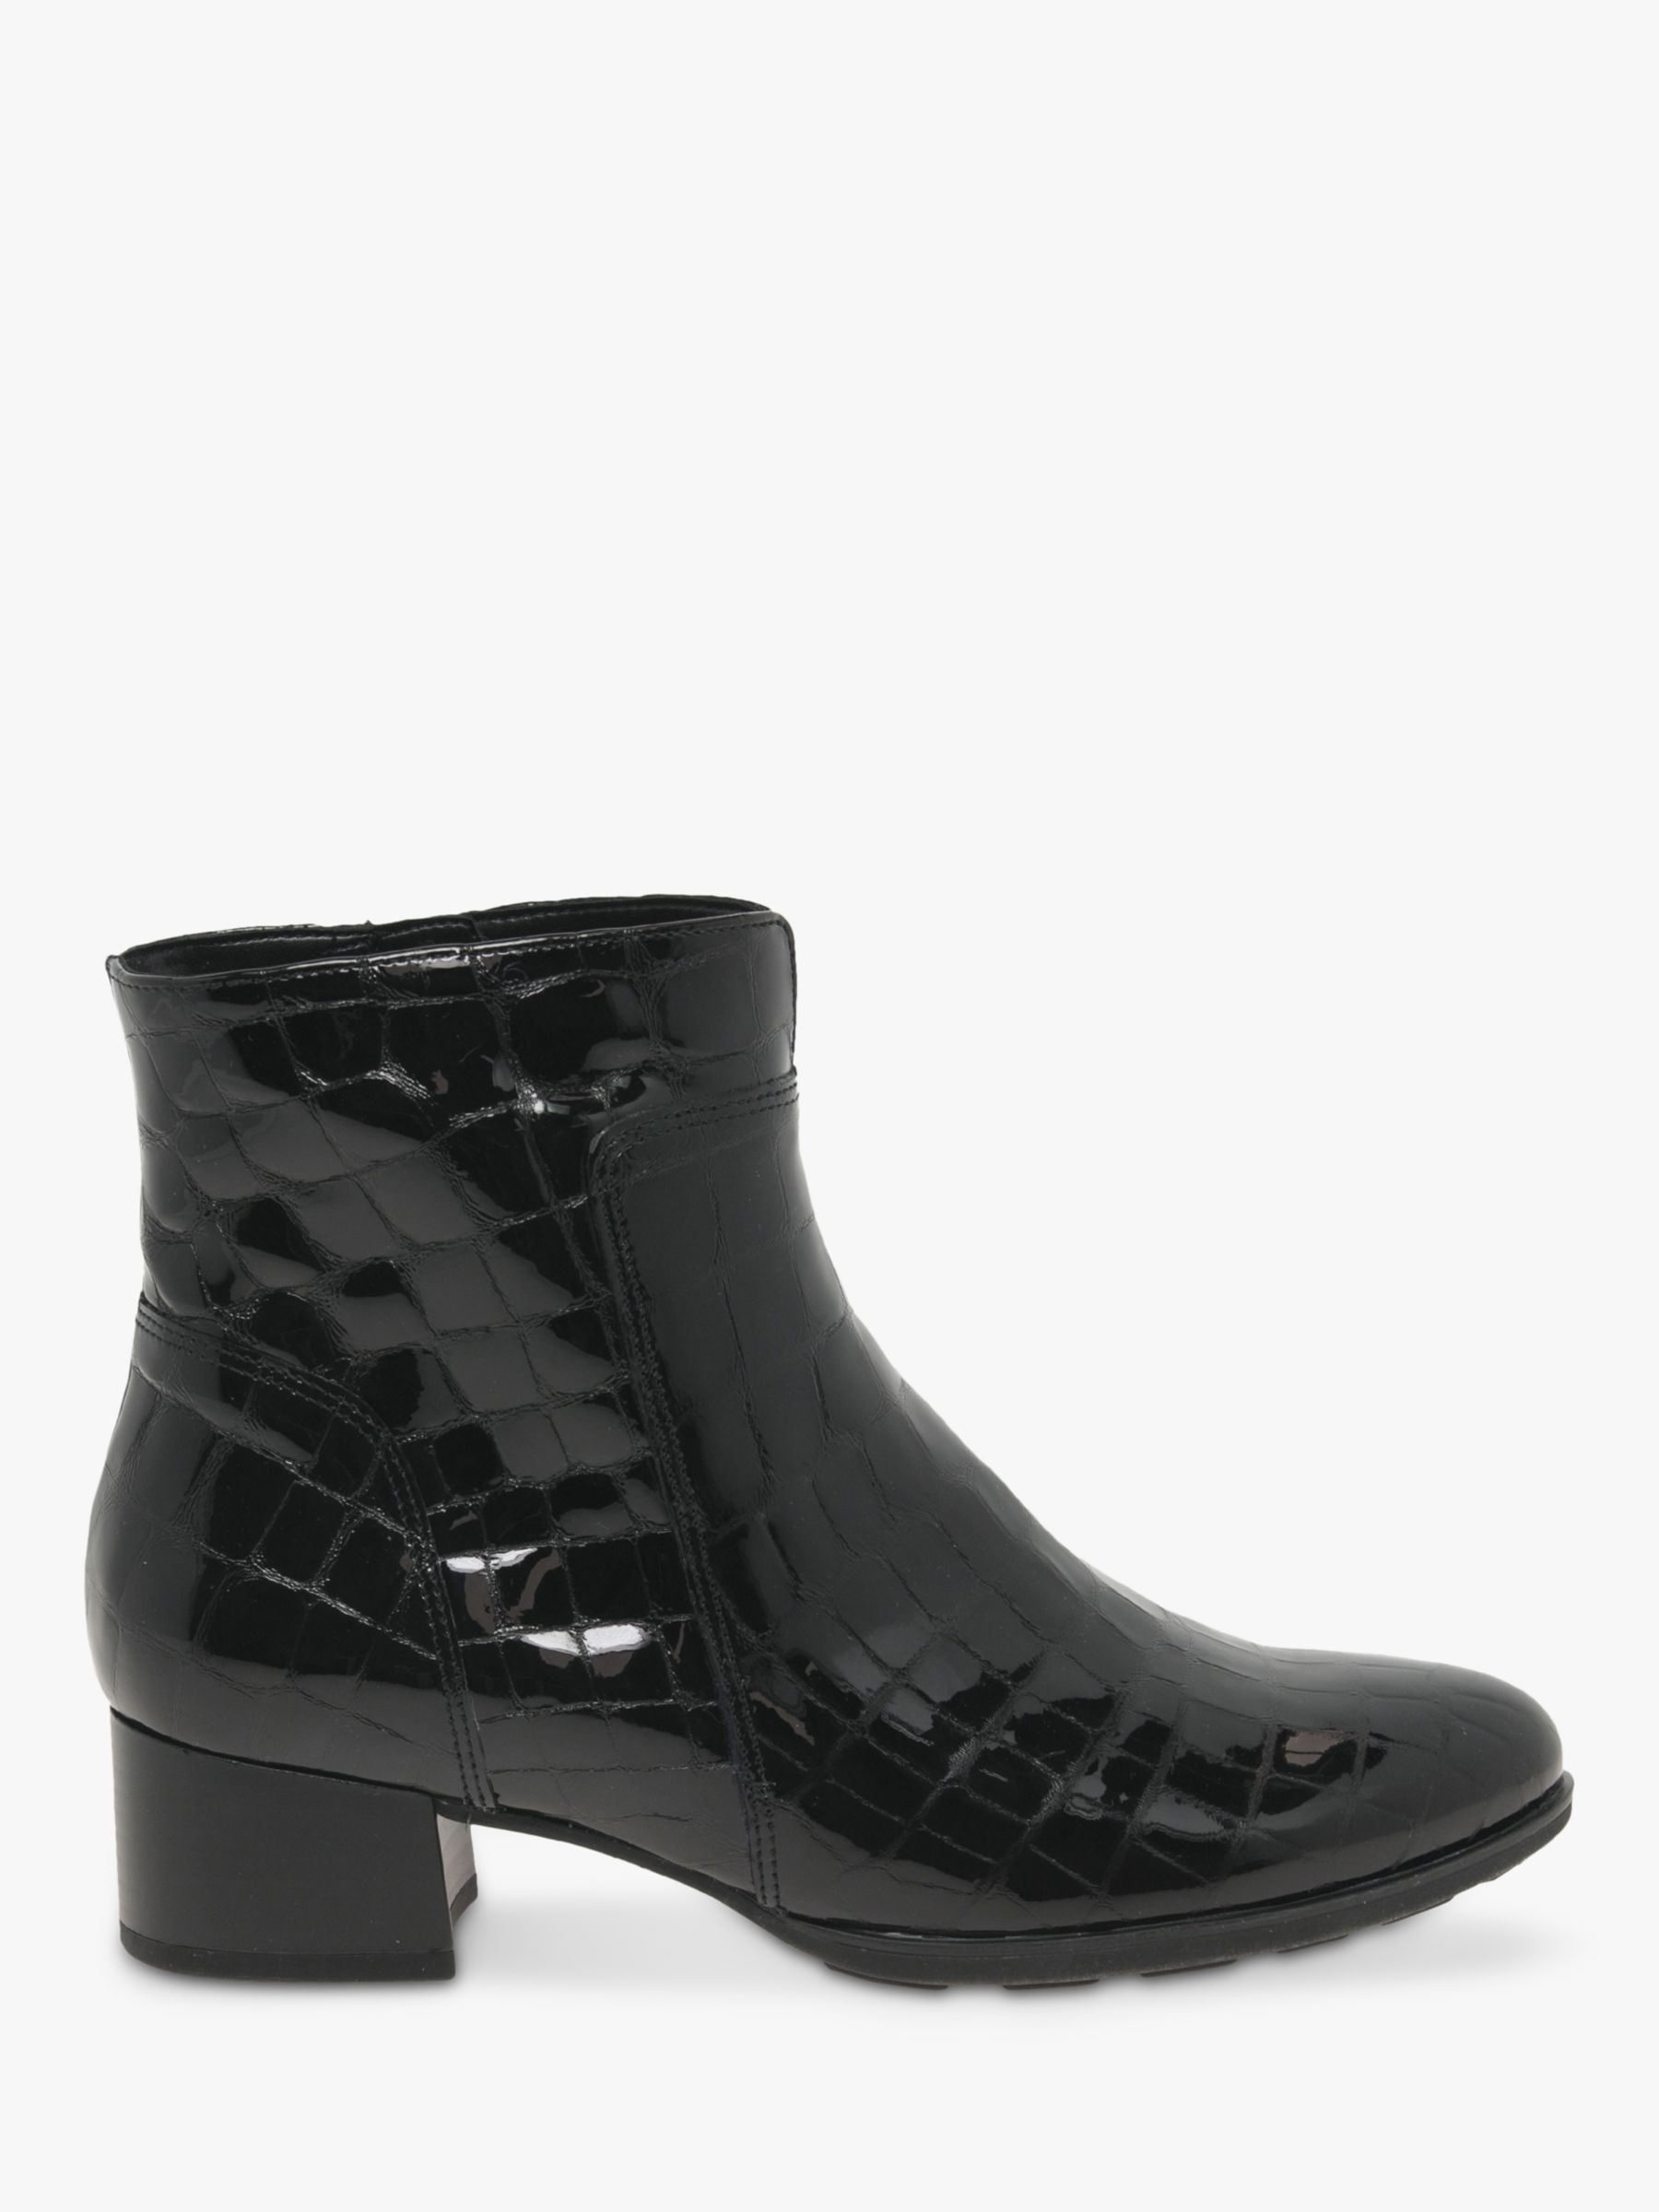 Shining foran Glatte Gabor Delphino Patent Croc Leather Ankle Boots, Black at John Lewis &  Partners